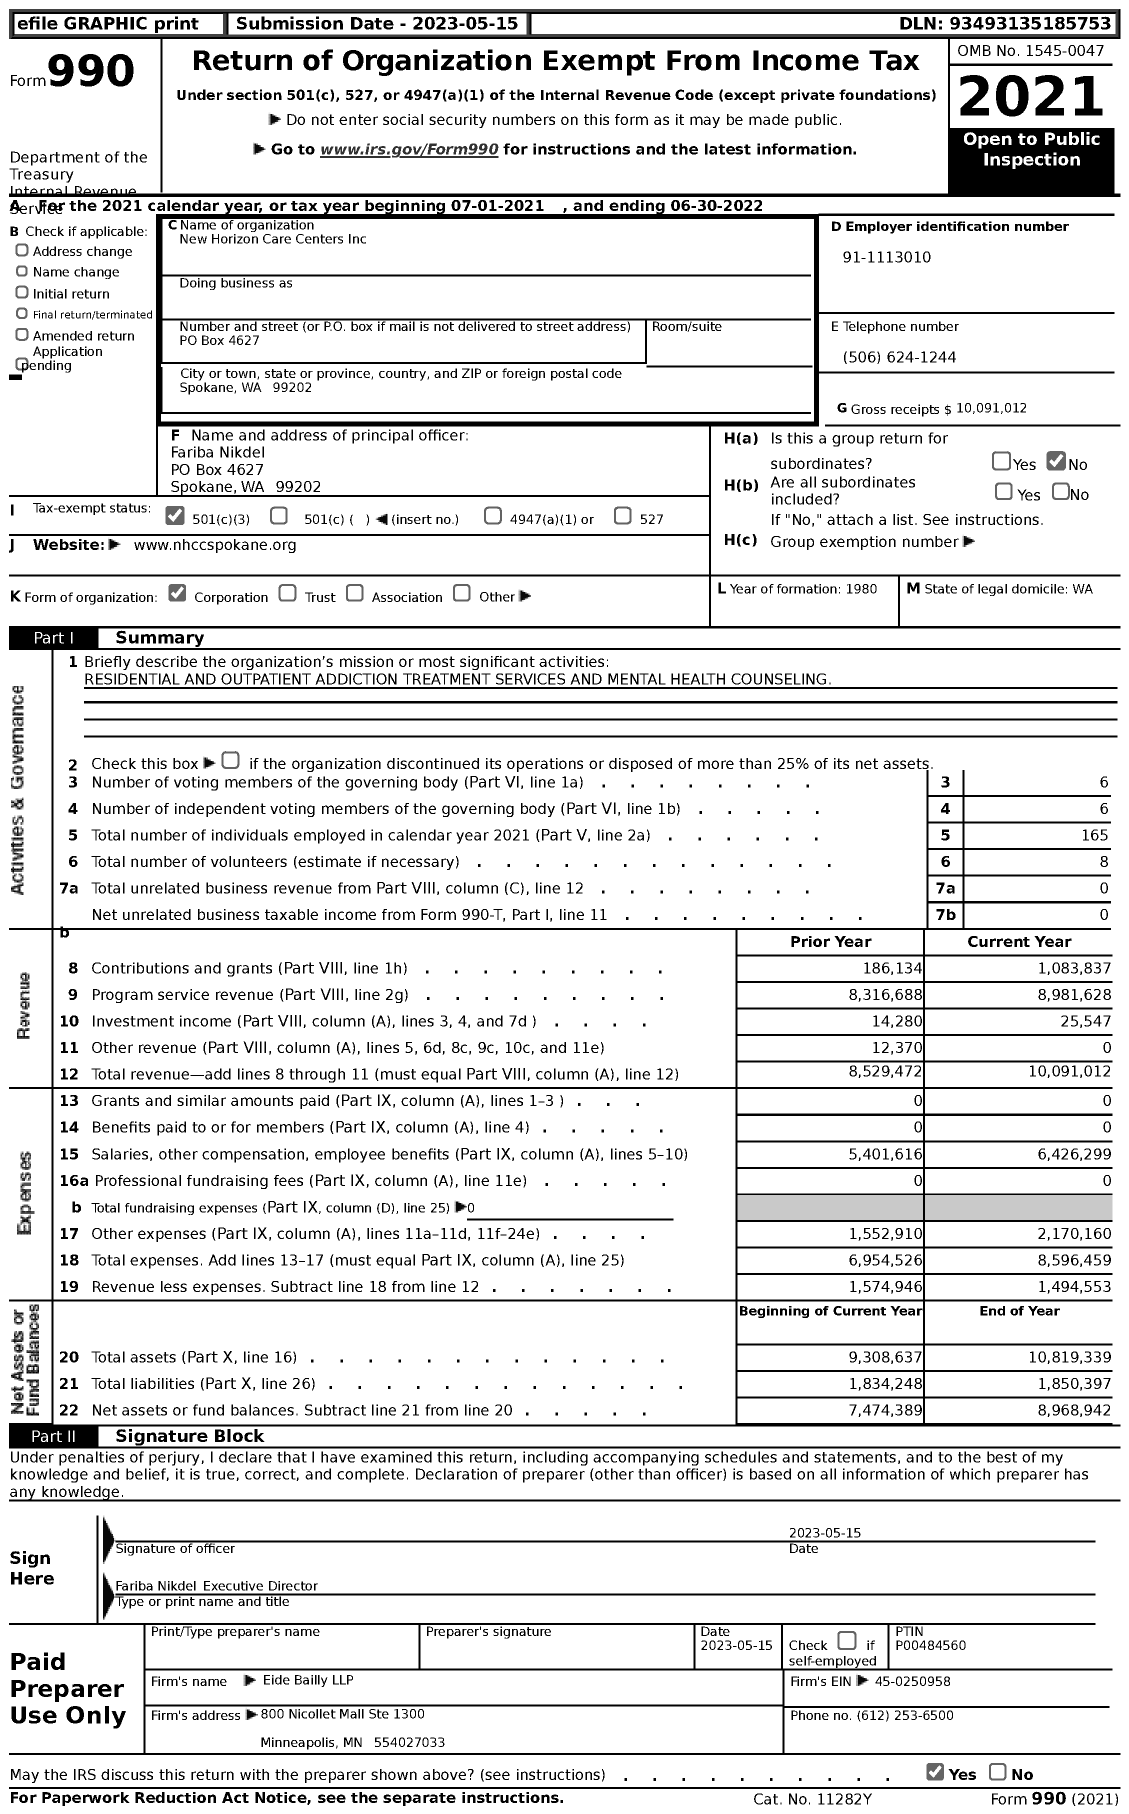 Image of first page of 2021 Form 990 for New Horizon Care Centers